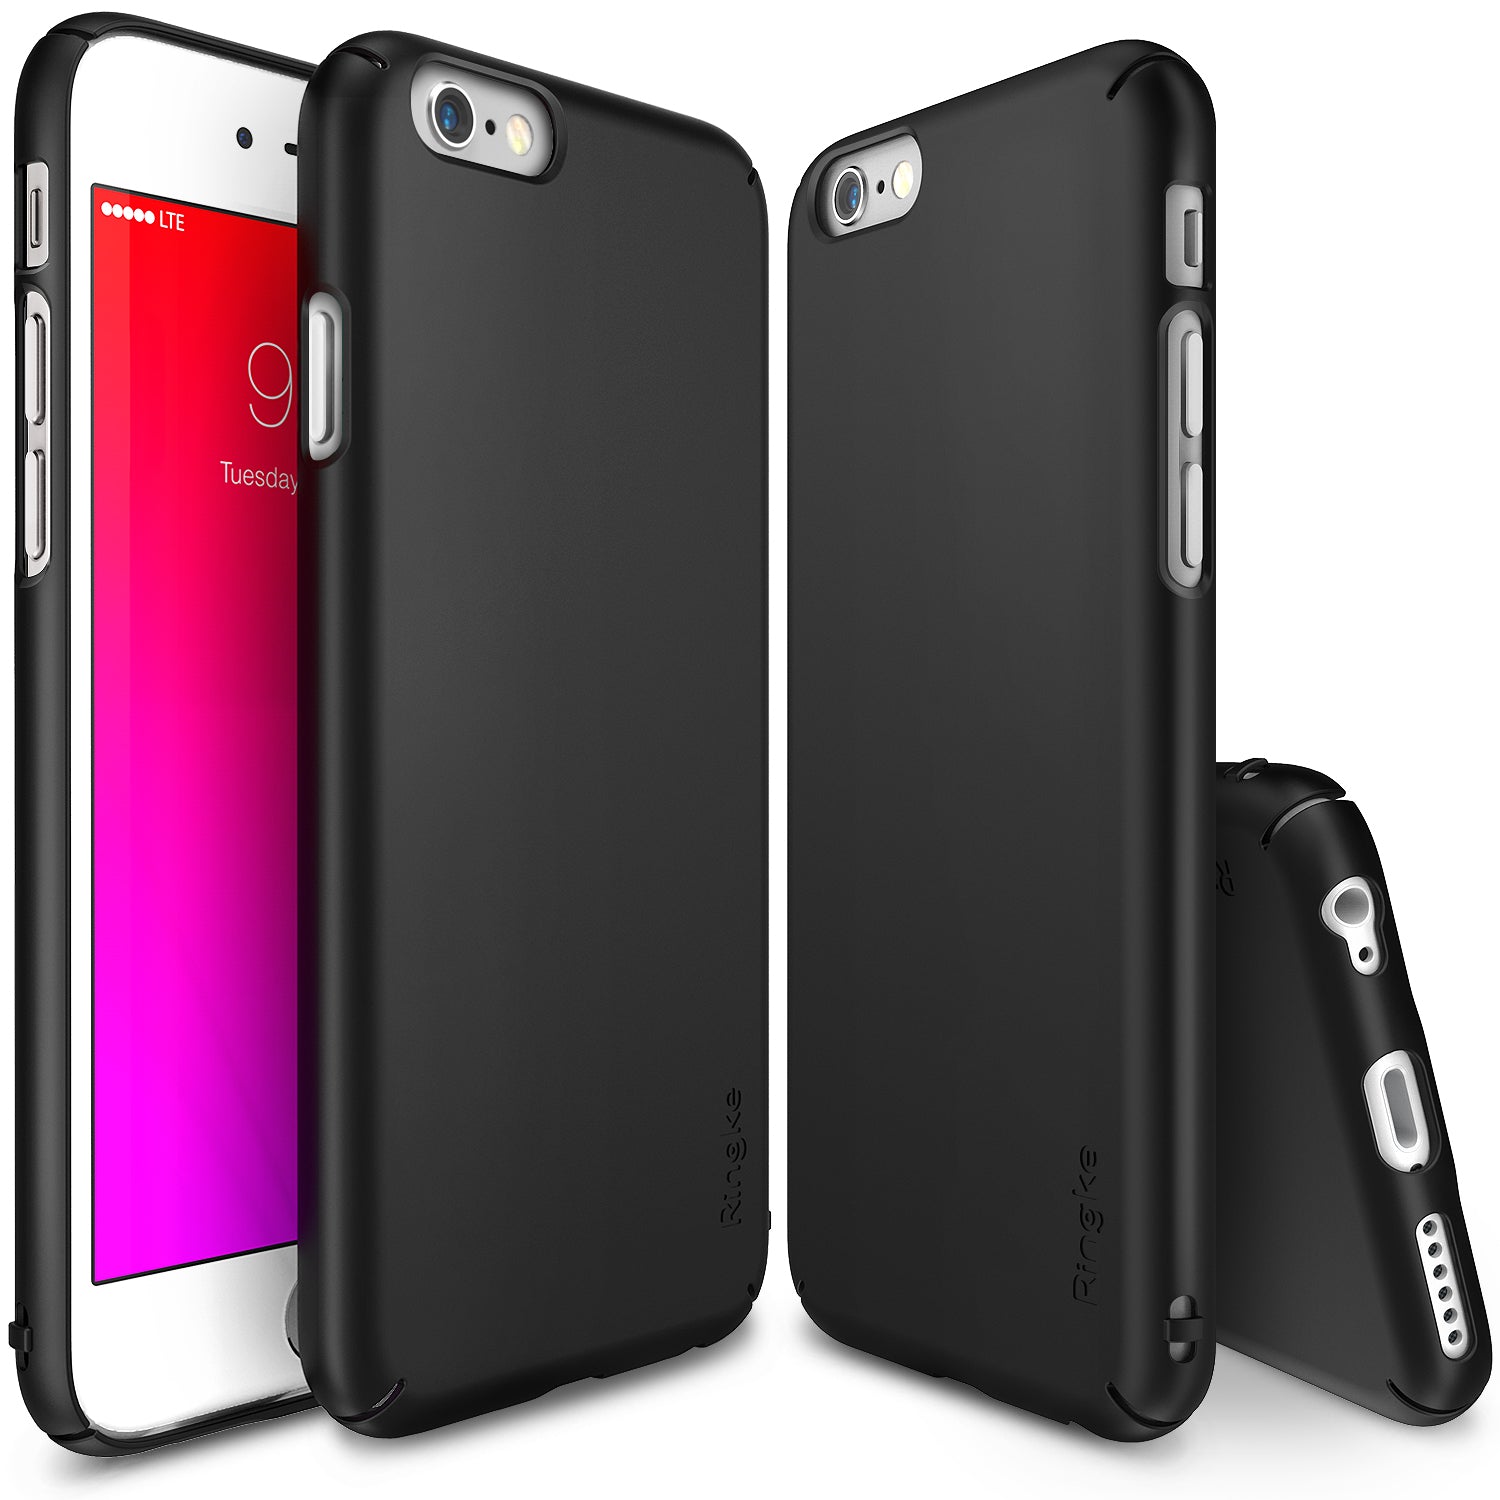 ringke slim lightweight hard pc thin case cover for iphone 6s plus main black